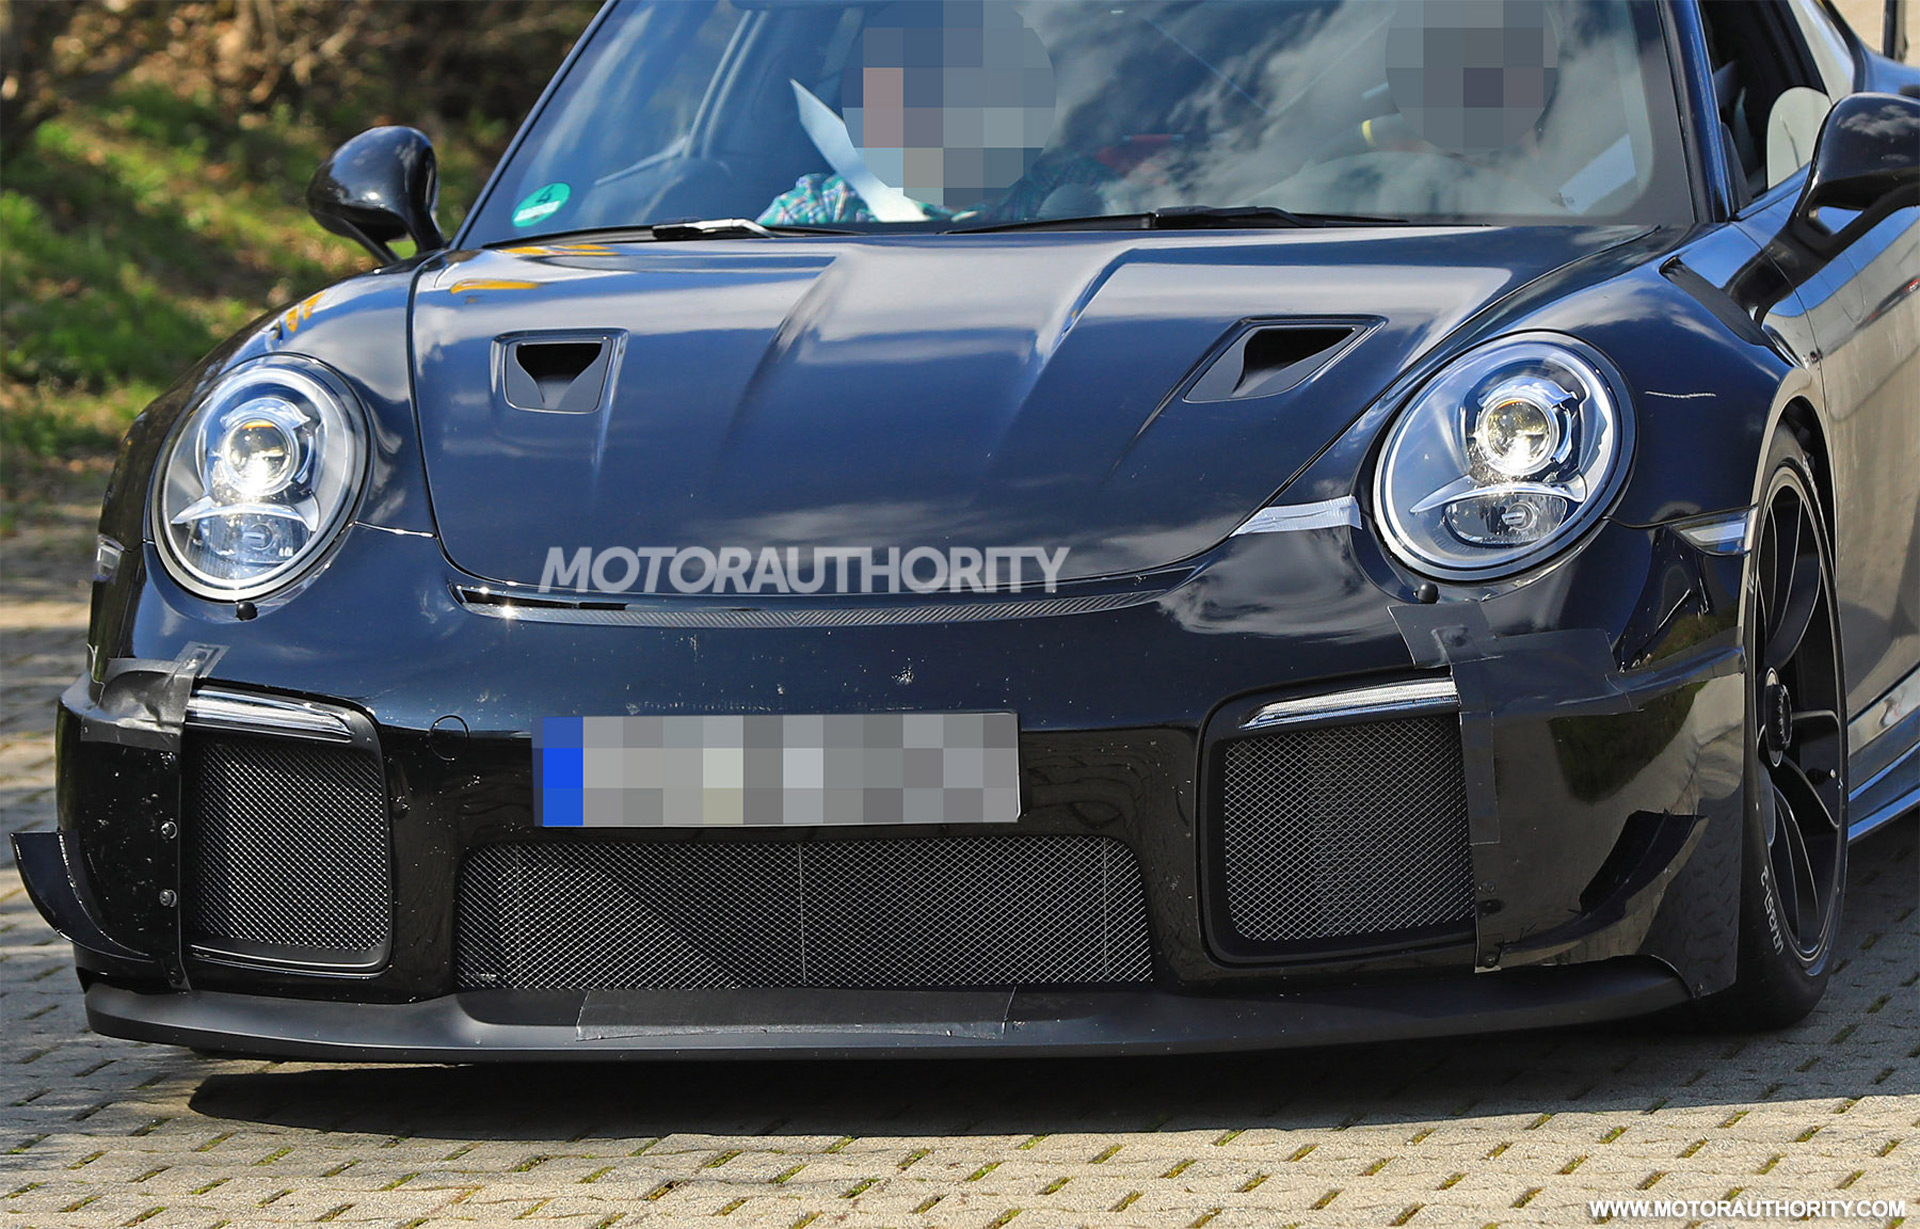 Porsche 911 GT2 RS specs surface, sub-7:00 'Ring time mooted